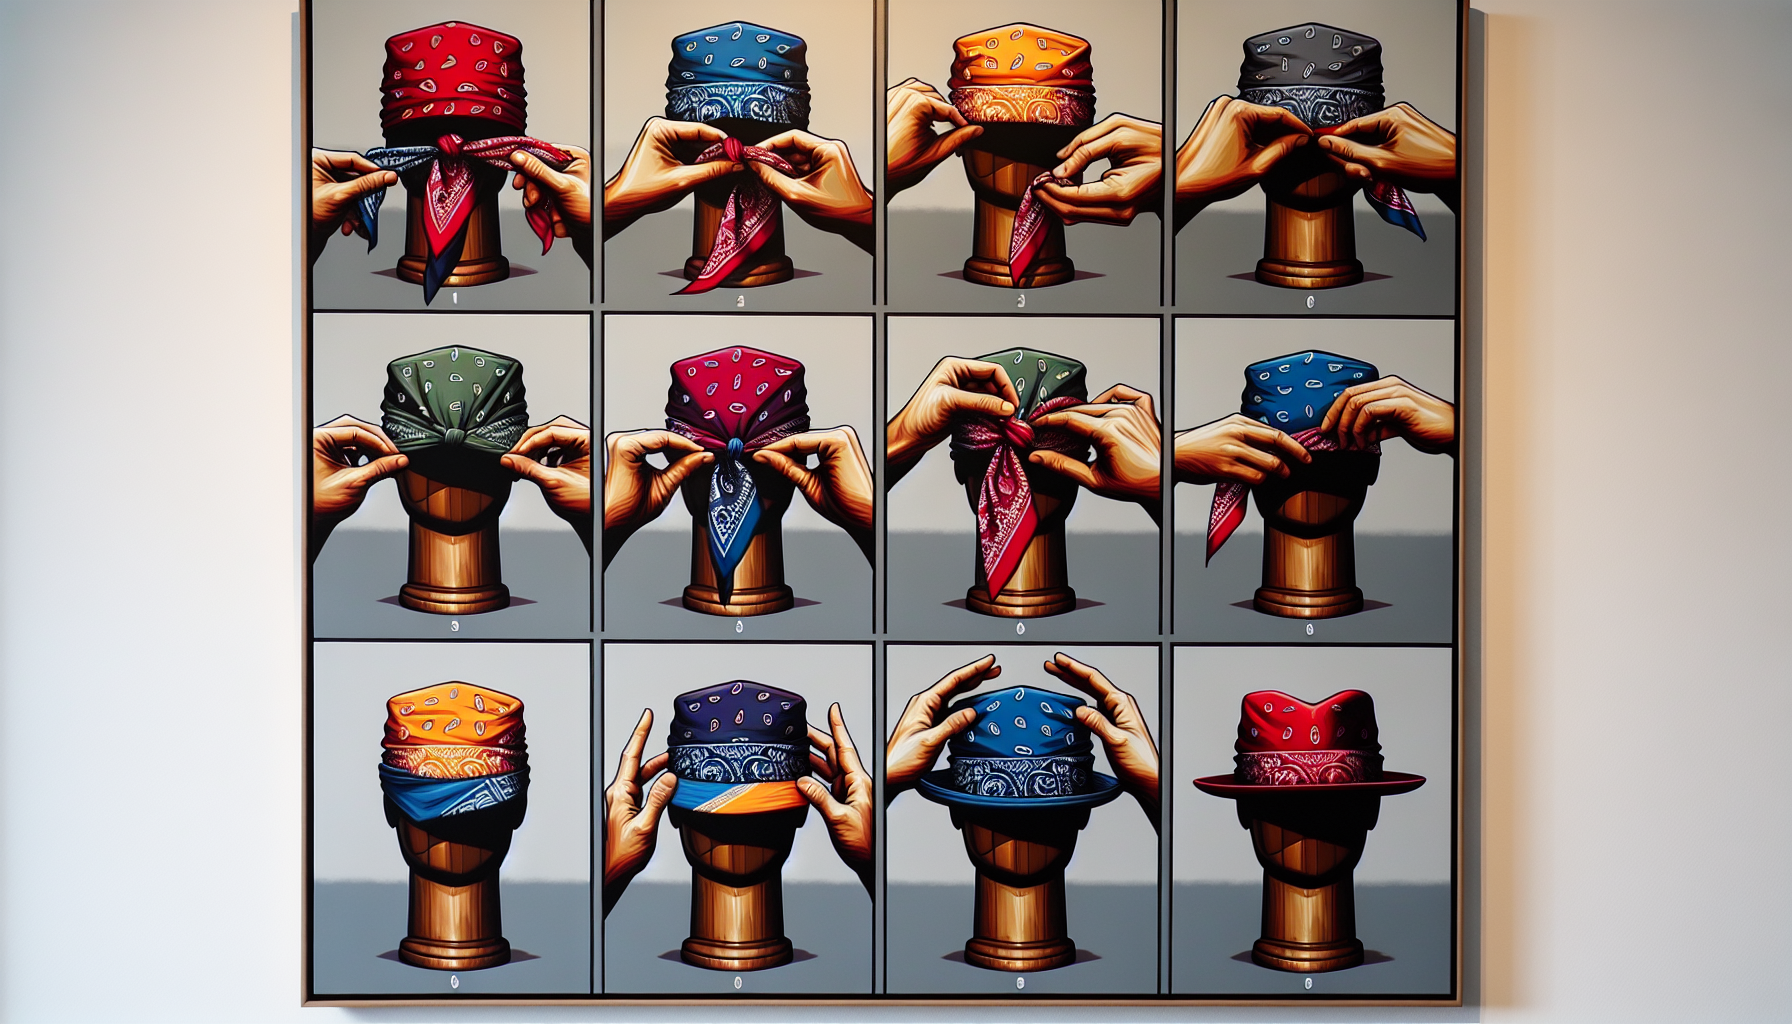 Master the art of tying different bandana hat styles with step-by-step instructions